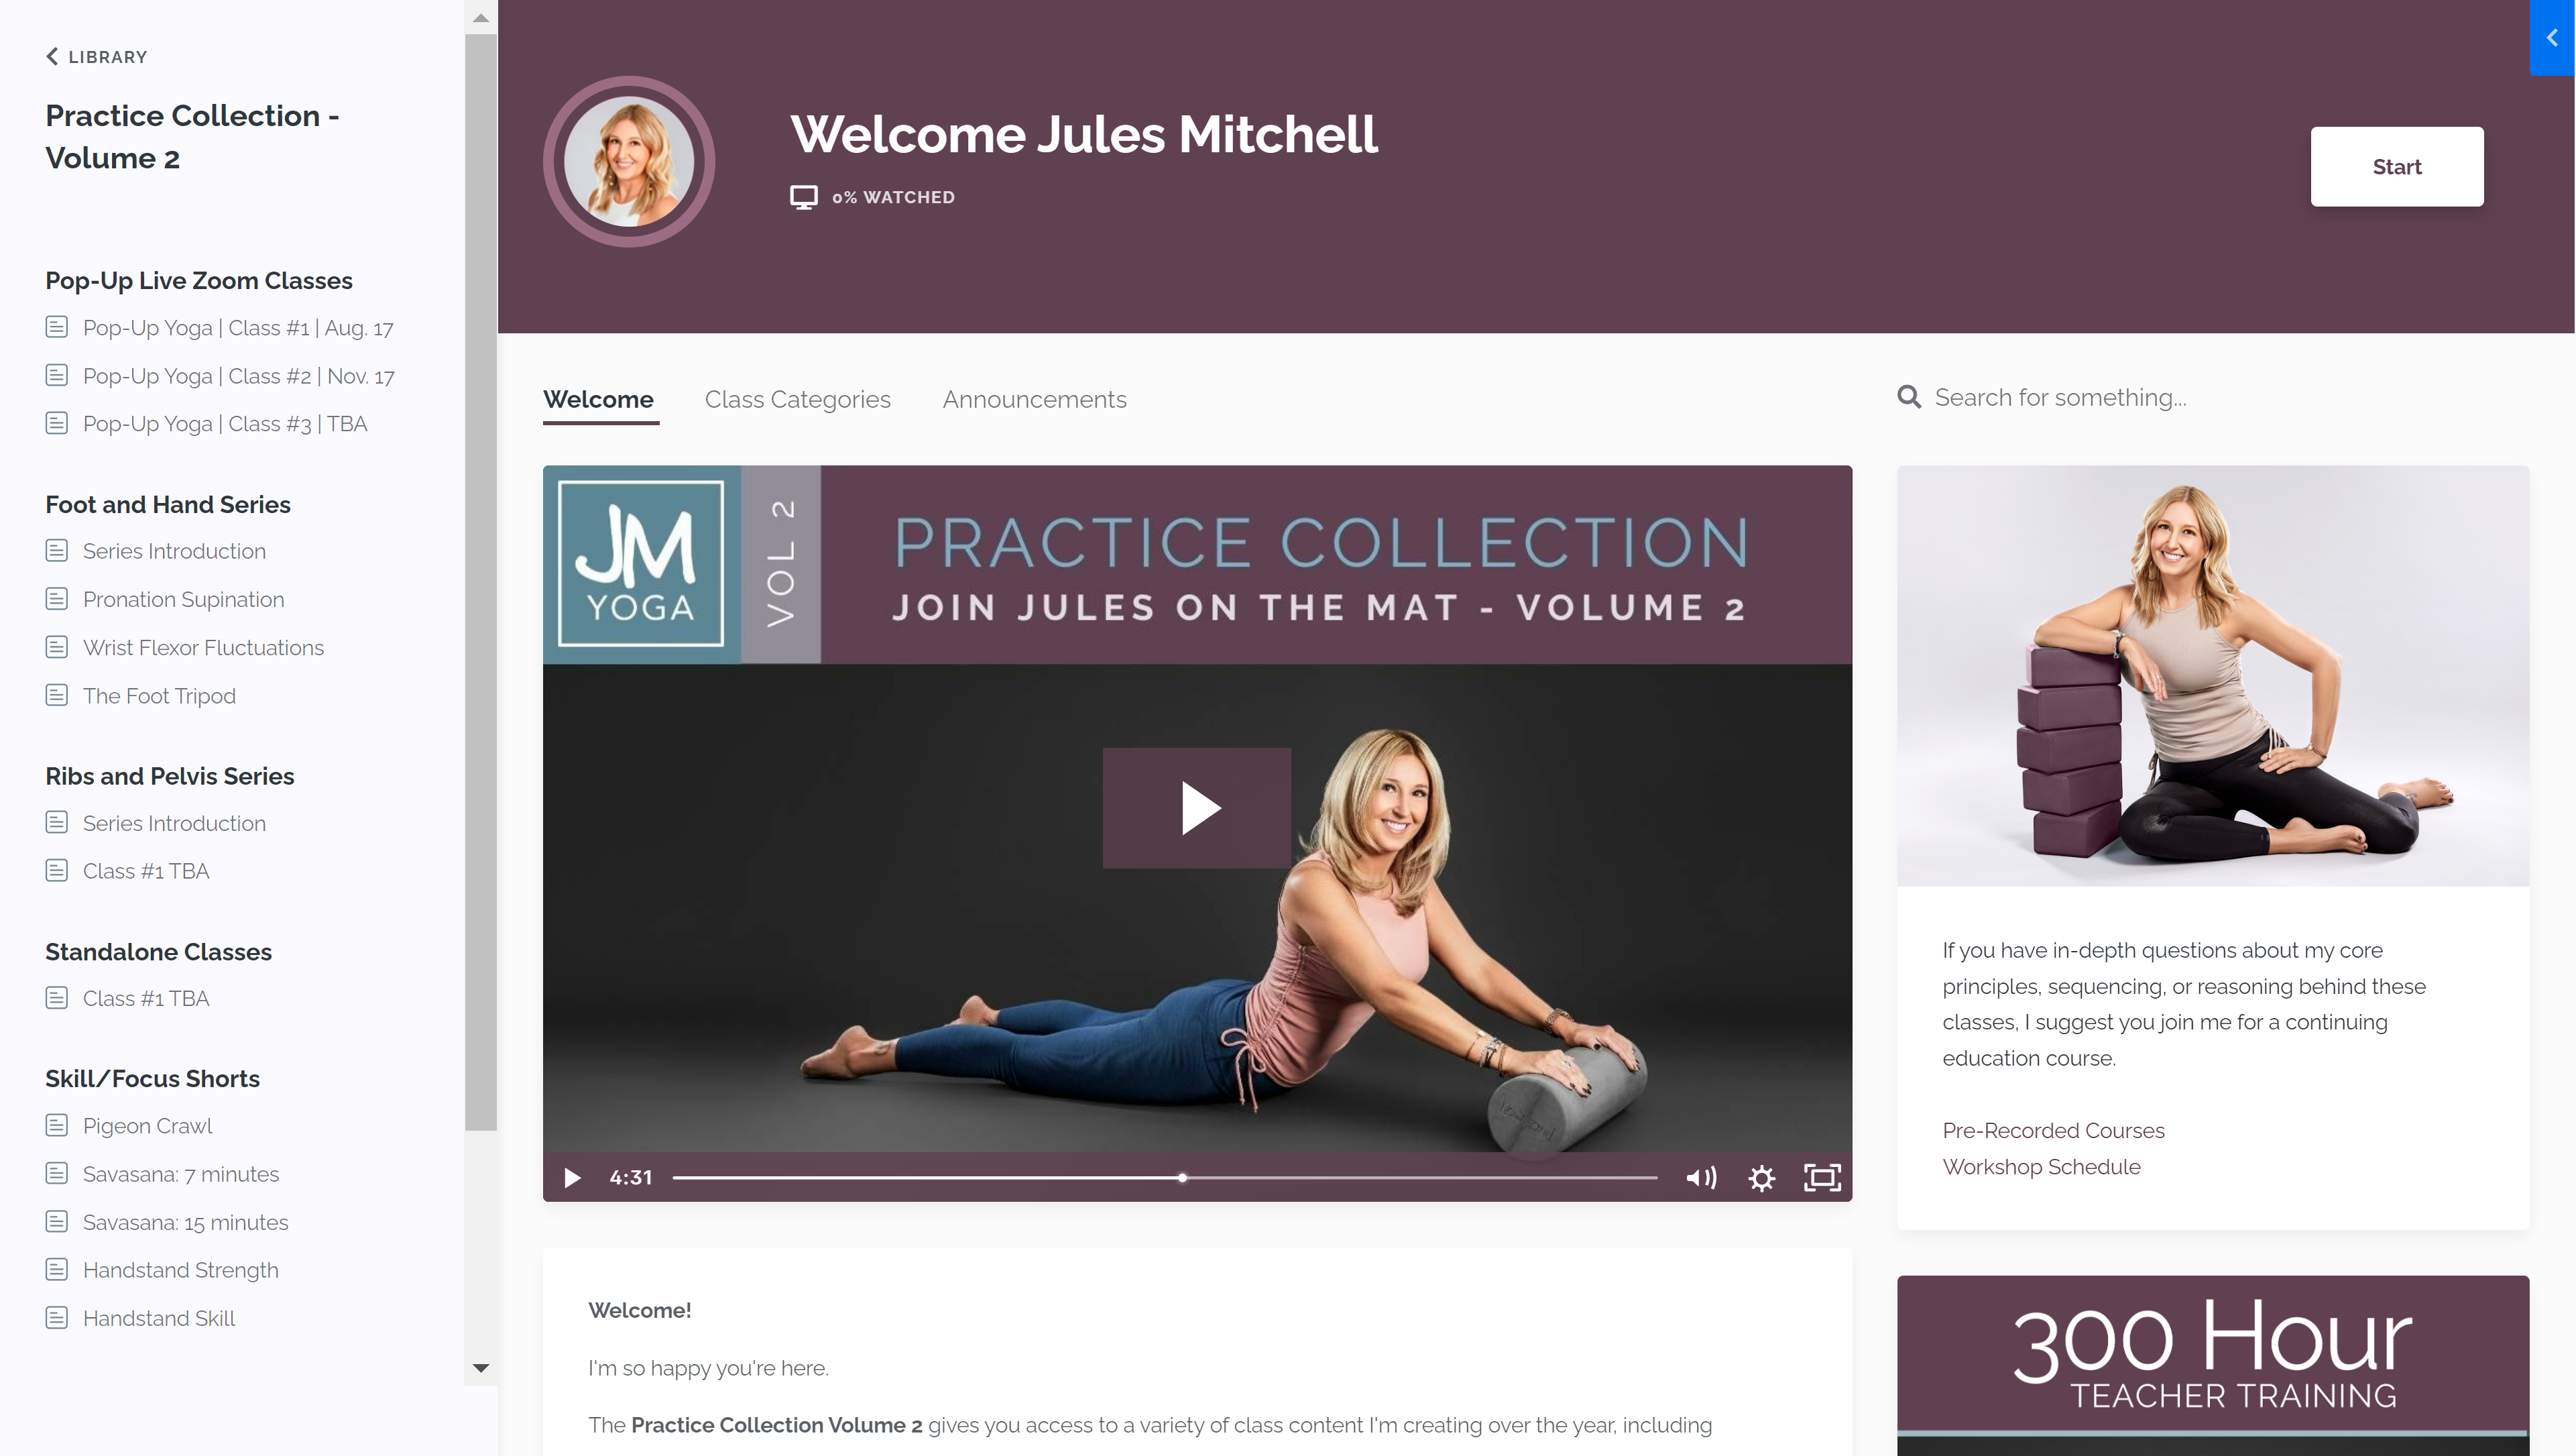 A snapshot of the welcome page inside the practice collection volume 2